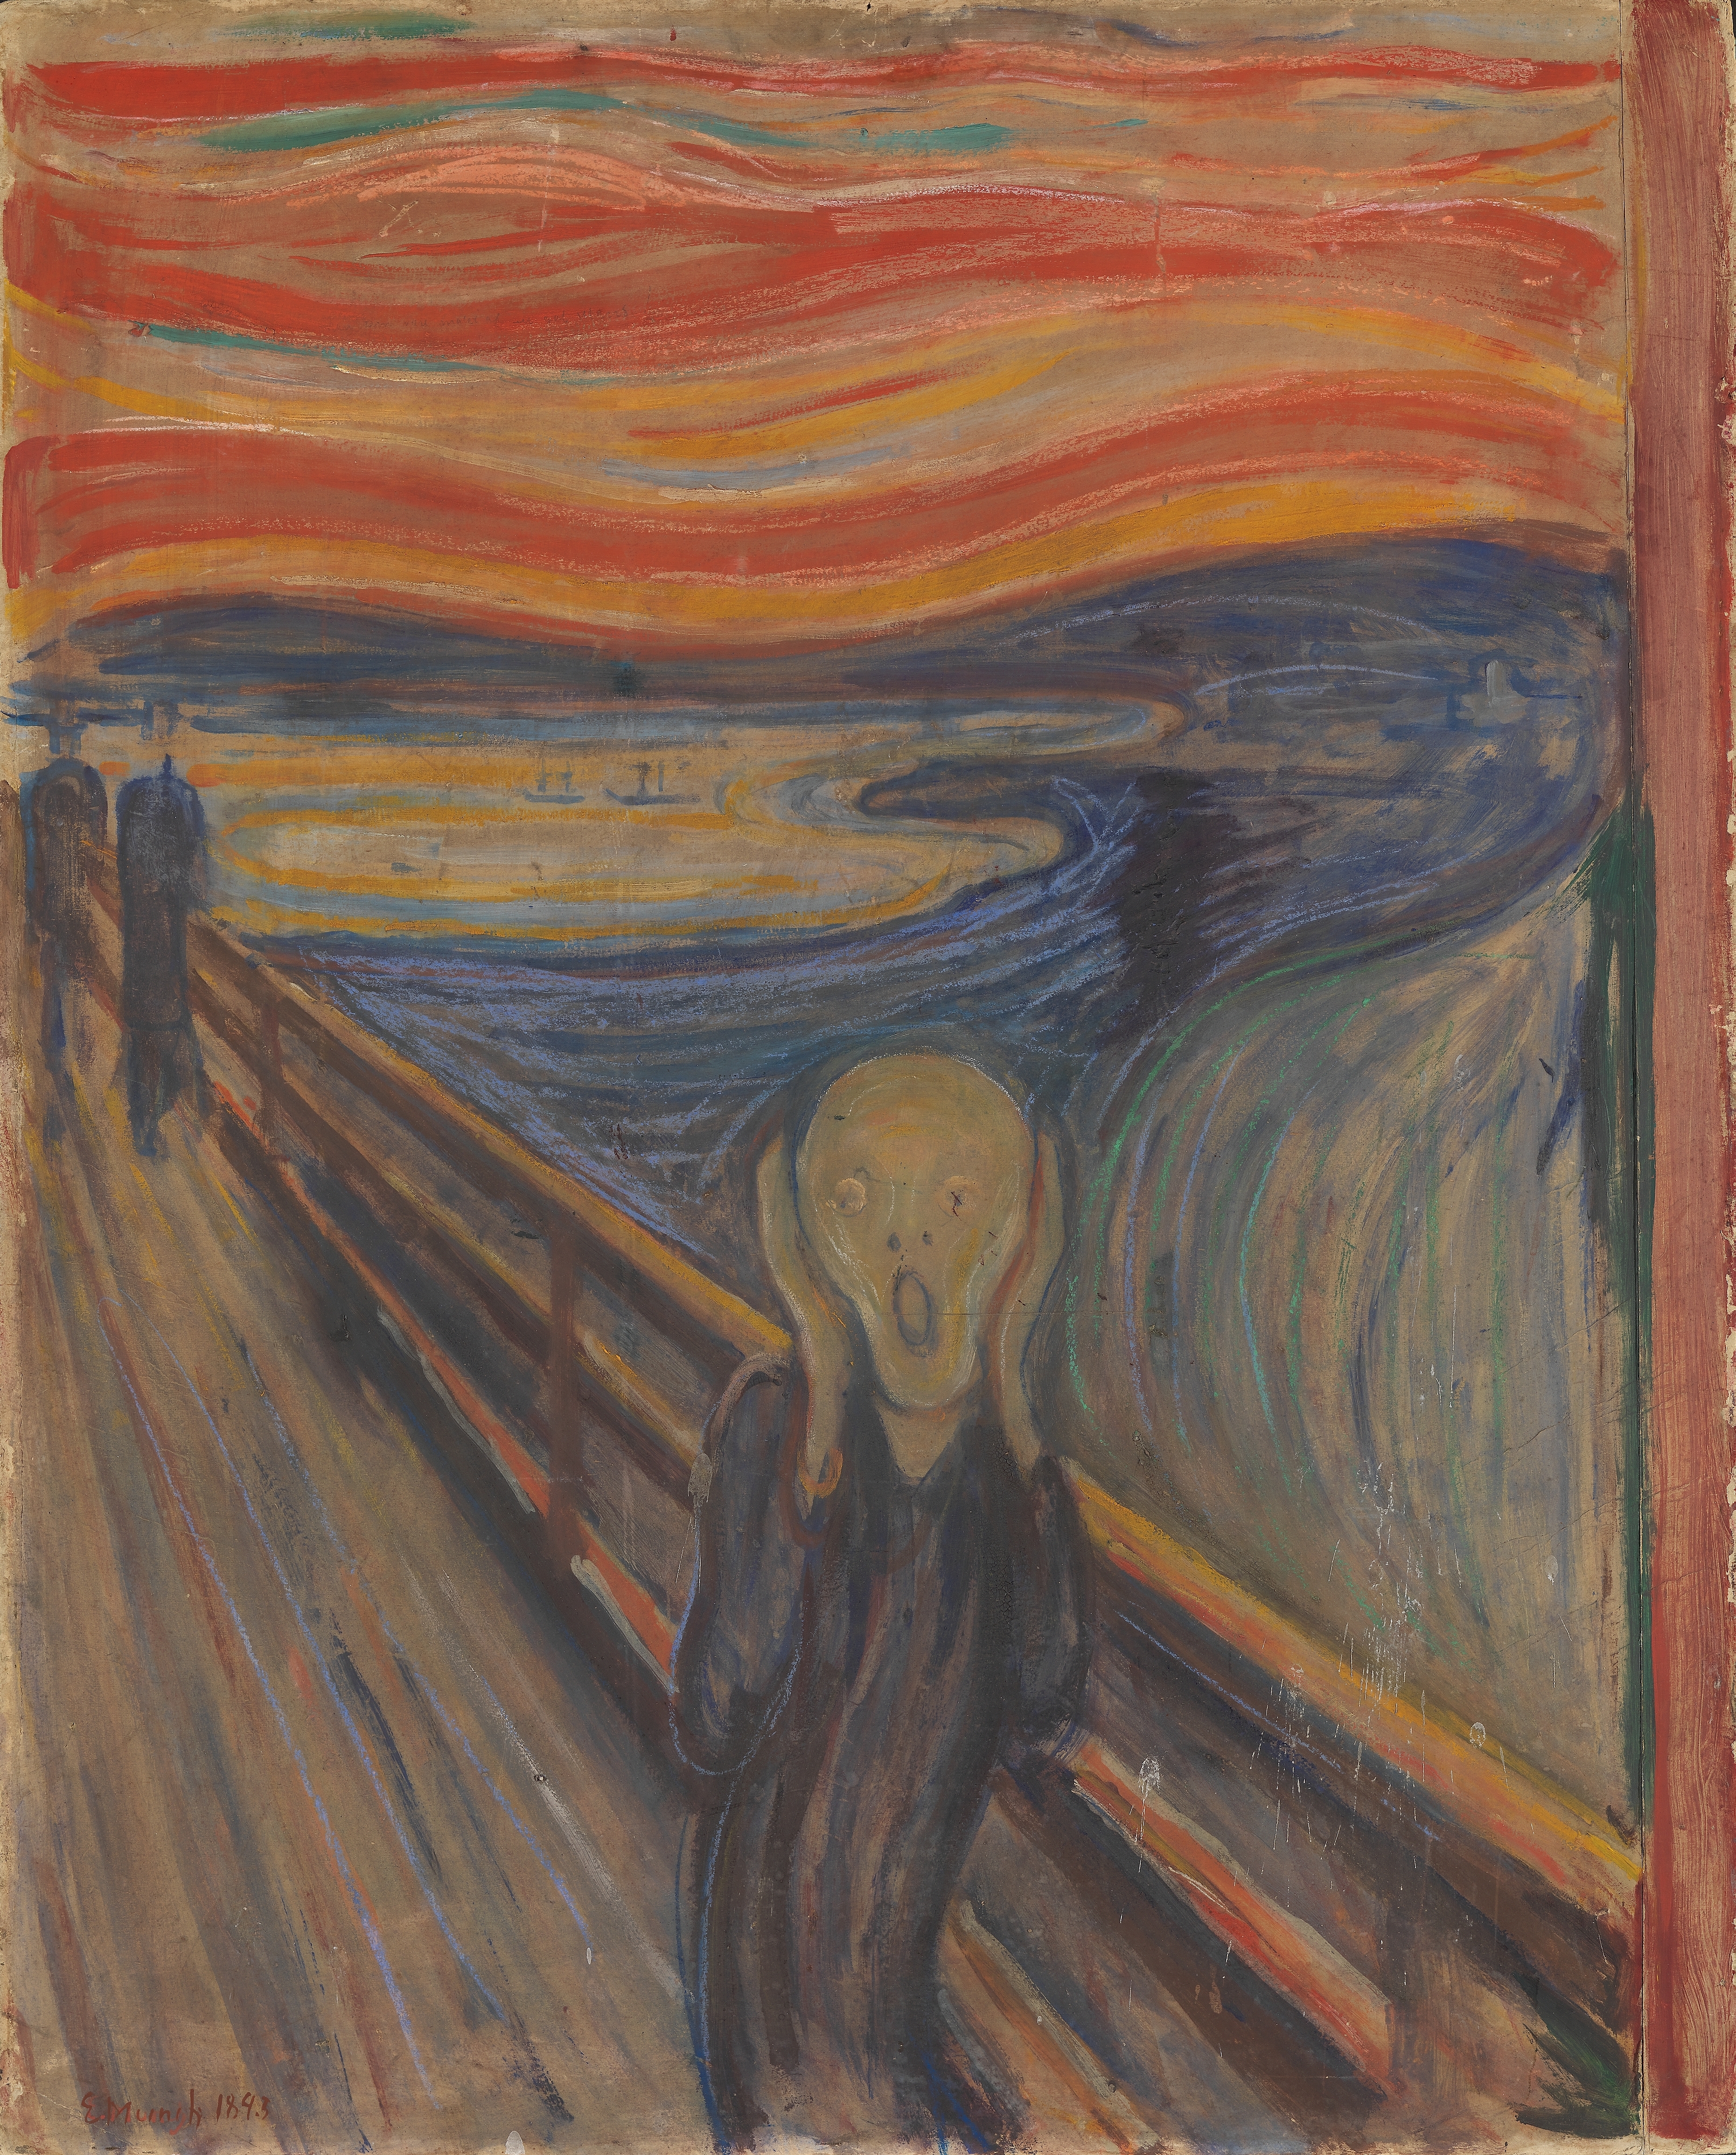 Edvard_Munch,_1893,_The_Scream,_oil,_tempera_and_pastel_on_cardboard,_91_x_73_cm,_National_Gallery_of_Norway.jpg